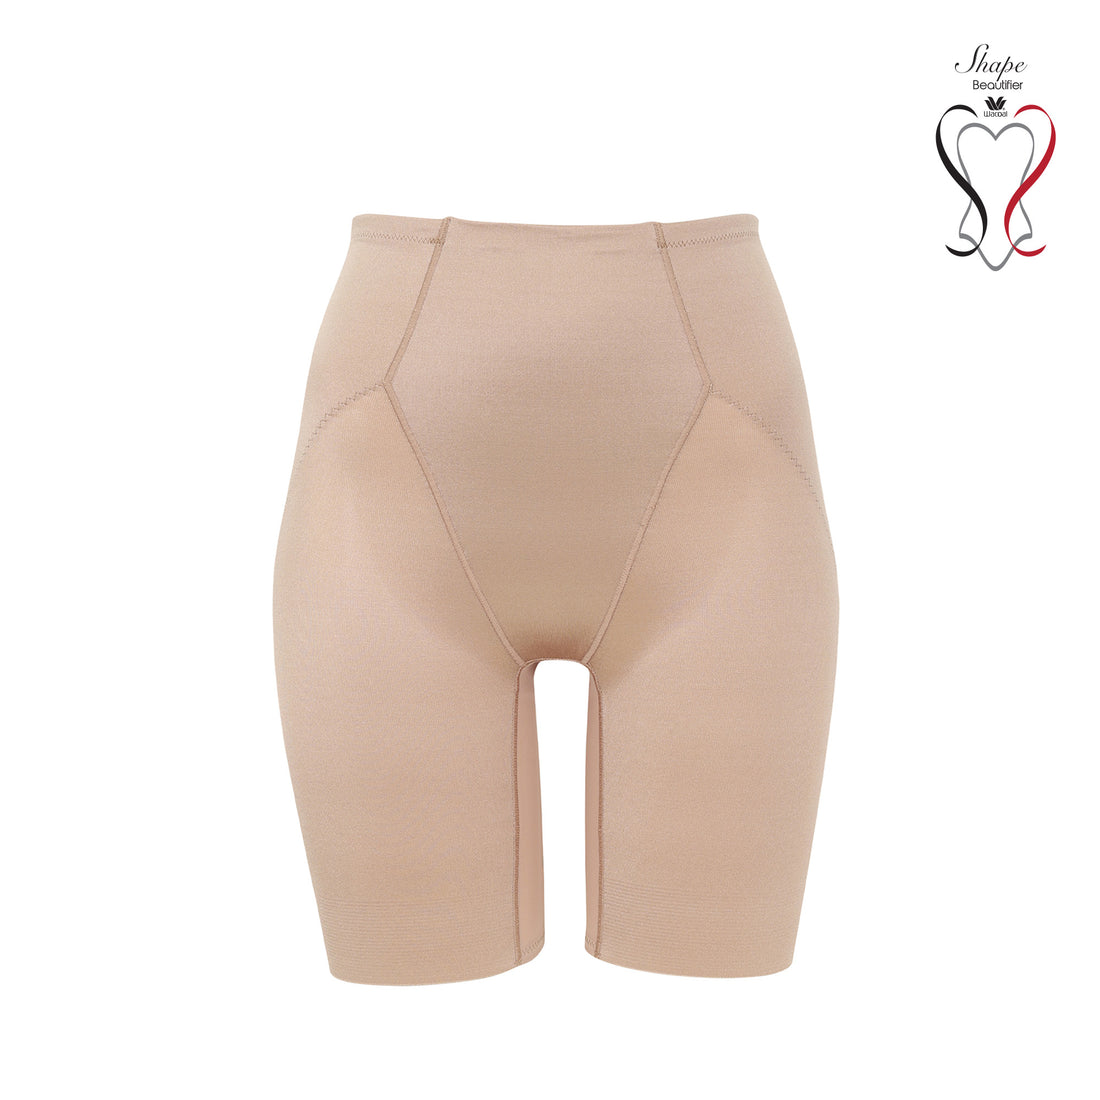 Wacoal Shapewear STAY Slimming Pants for Abdomen, Hips and Thighs Mode –  Thai Wacoal Public Company Limited